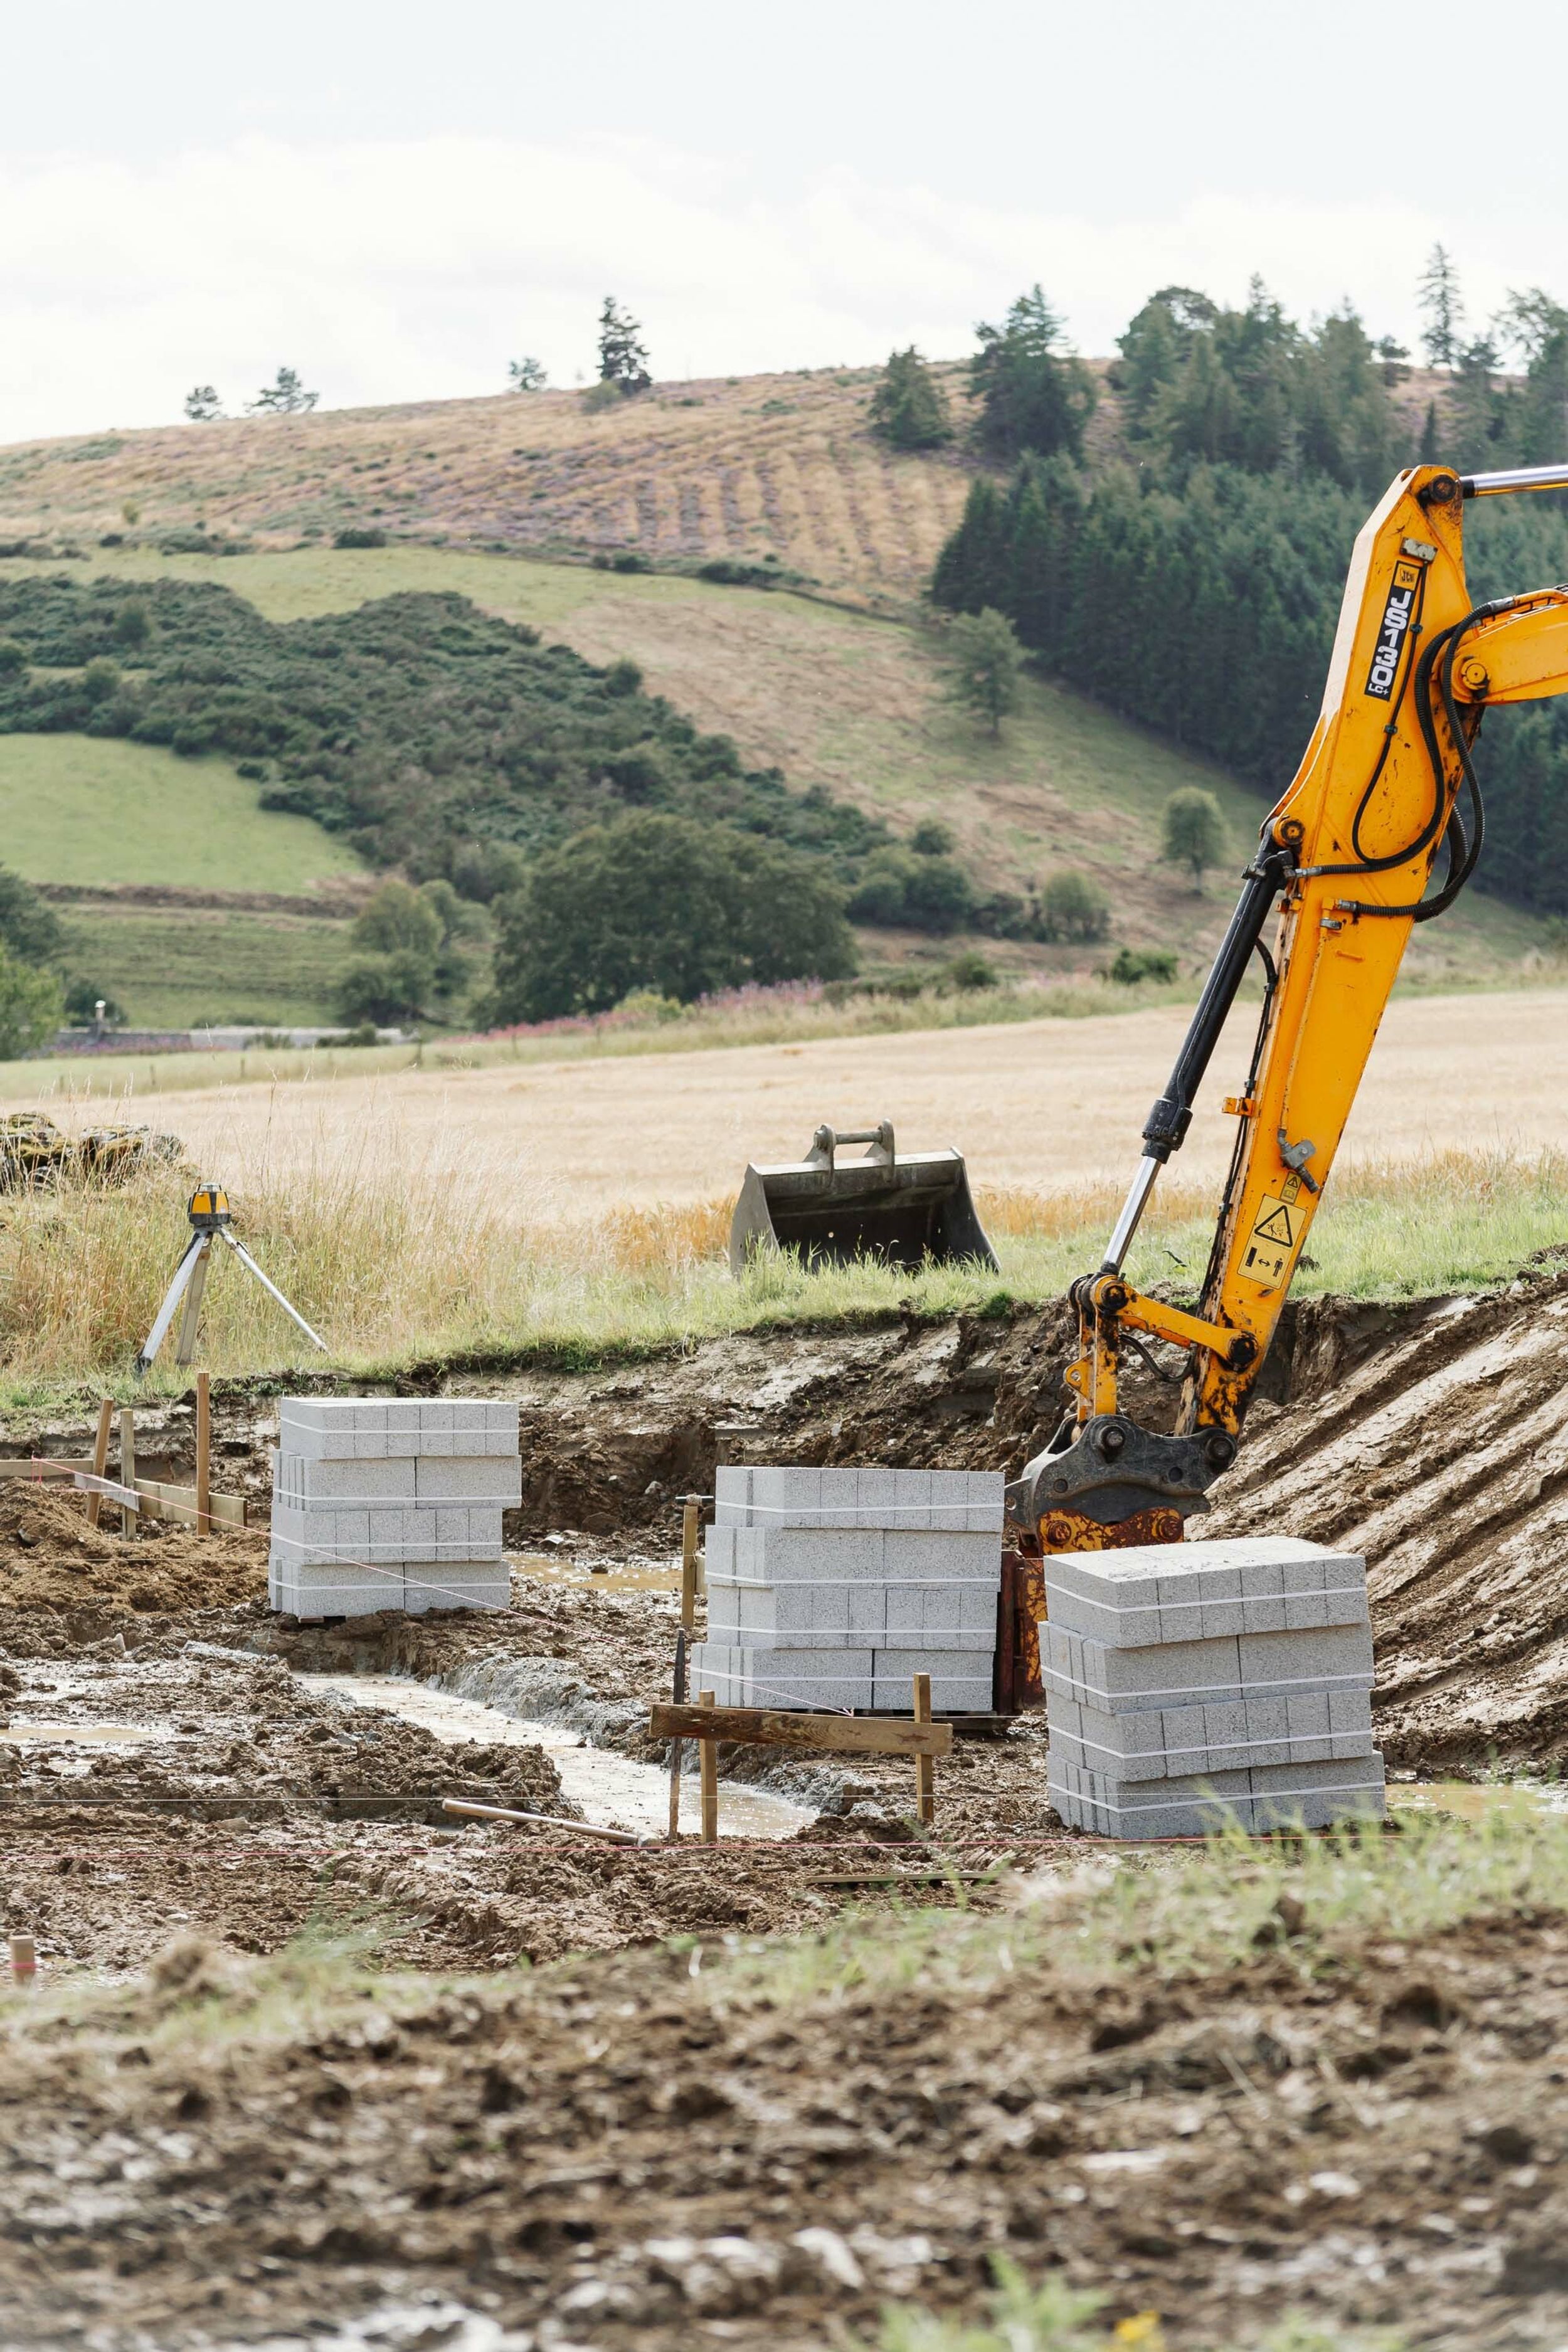 Stacks of grey concrete blocks sit next to the muddy foundations of new home. Builders line has been run around the permitter of the foundations. A yellow digger arm is visible. A digger bucket and laser level are in the background. A forest covered hill is in the distance.